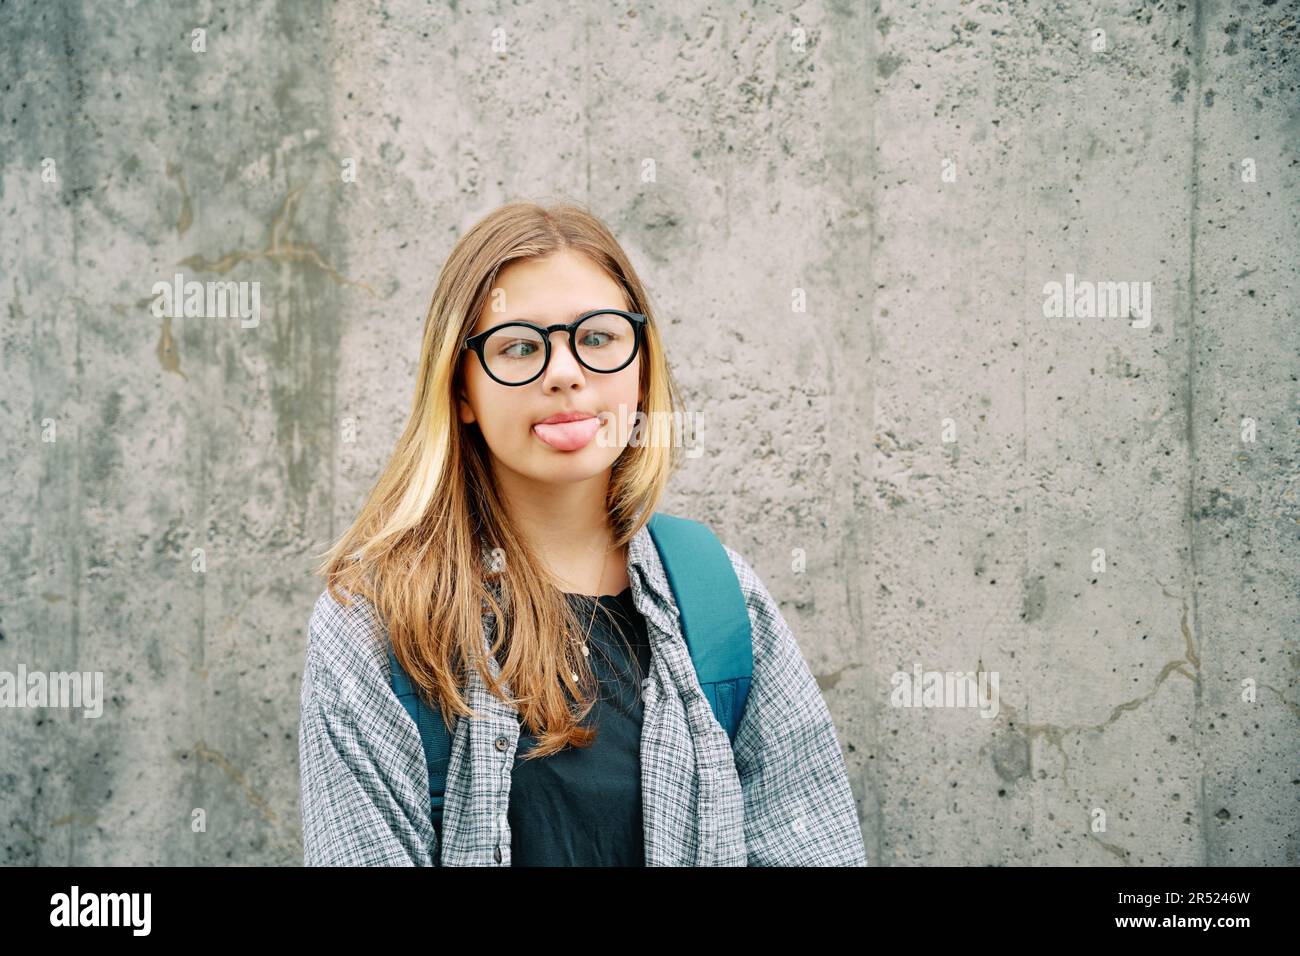 Outdoor portrait of silly young teenage kid girl pulling a tongue, crossing eyes over her nose, wearing glasses and backpack, posing on grey wall back Stock Photo